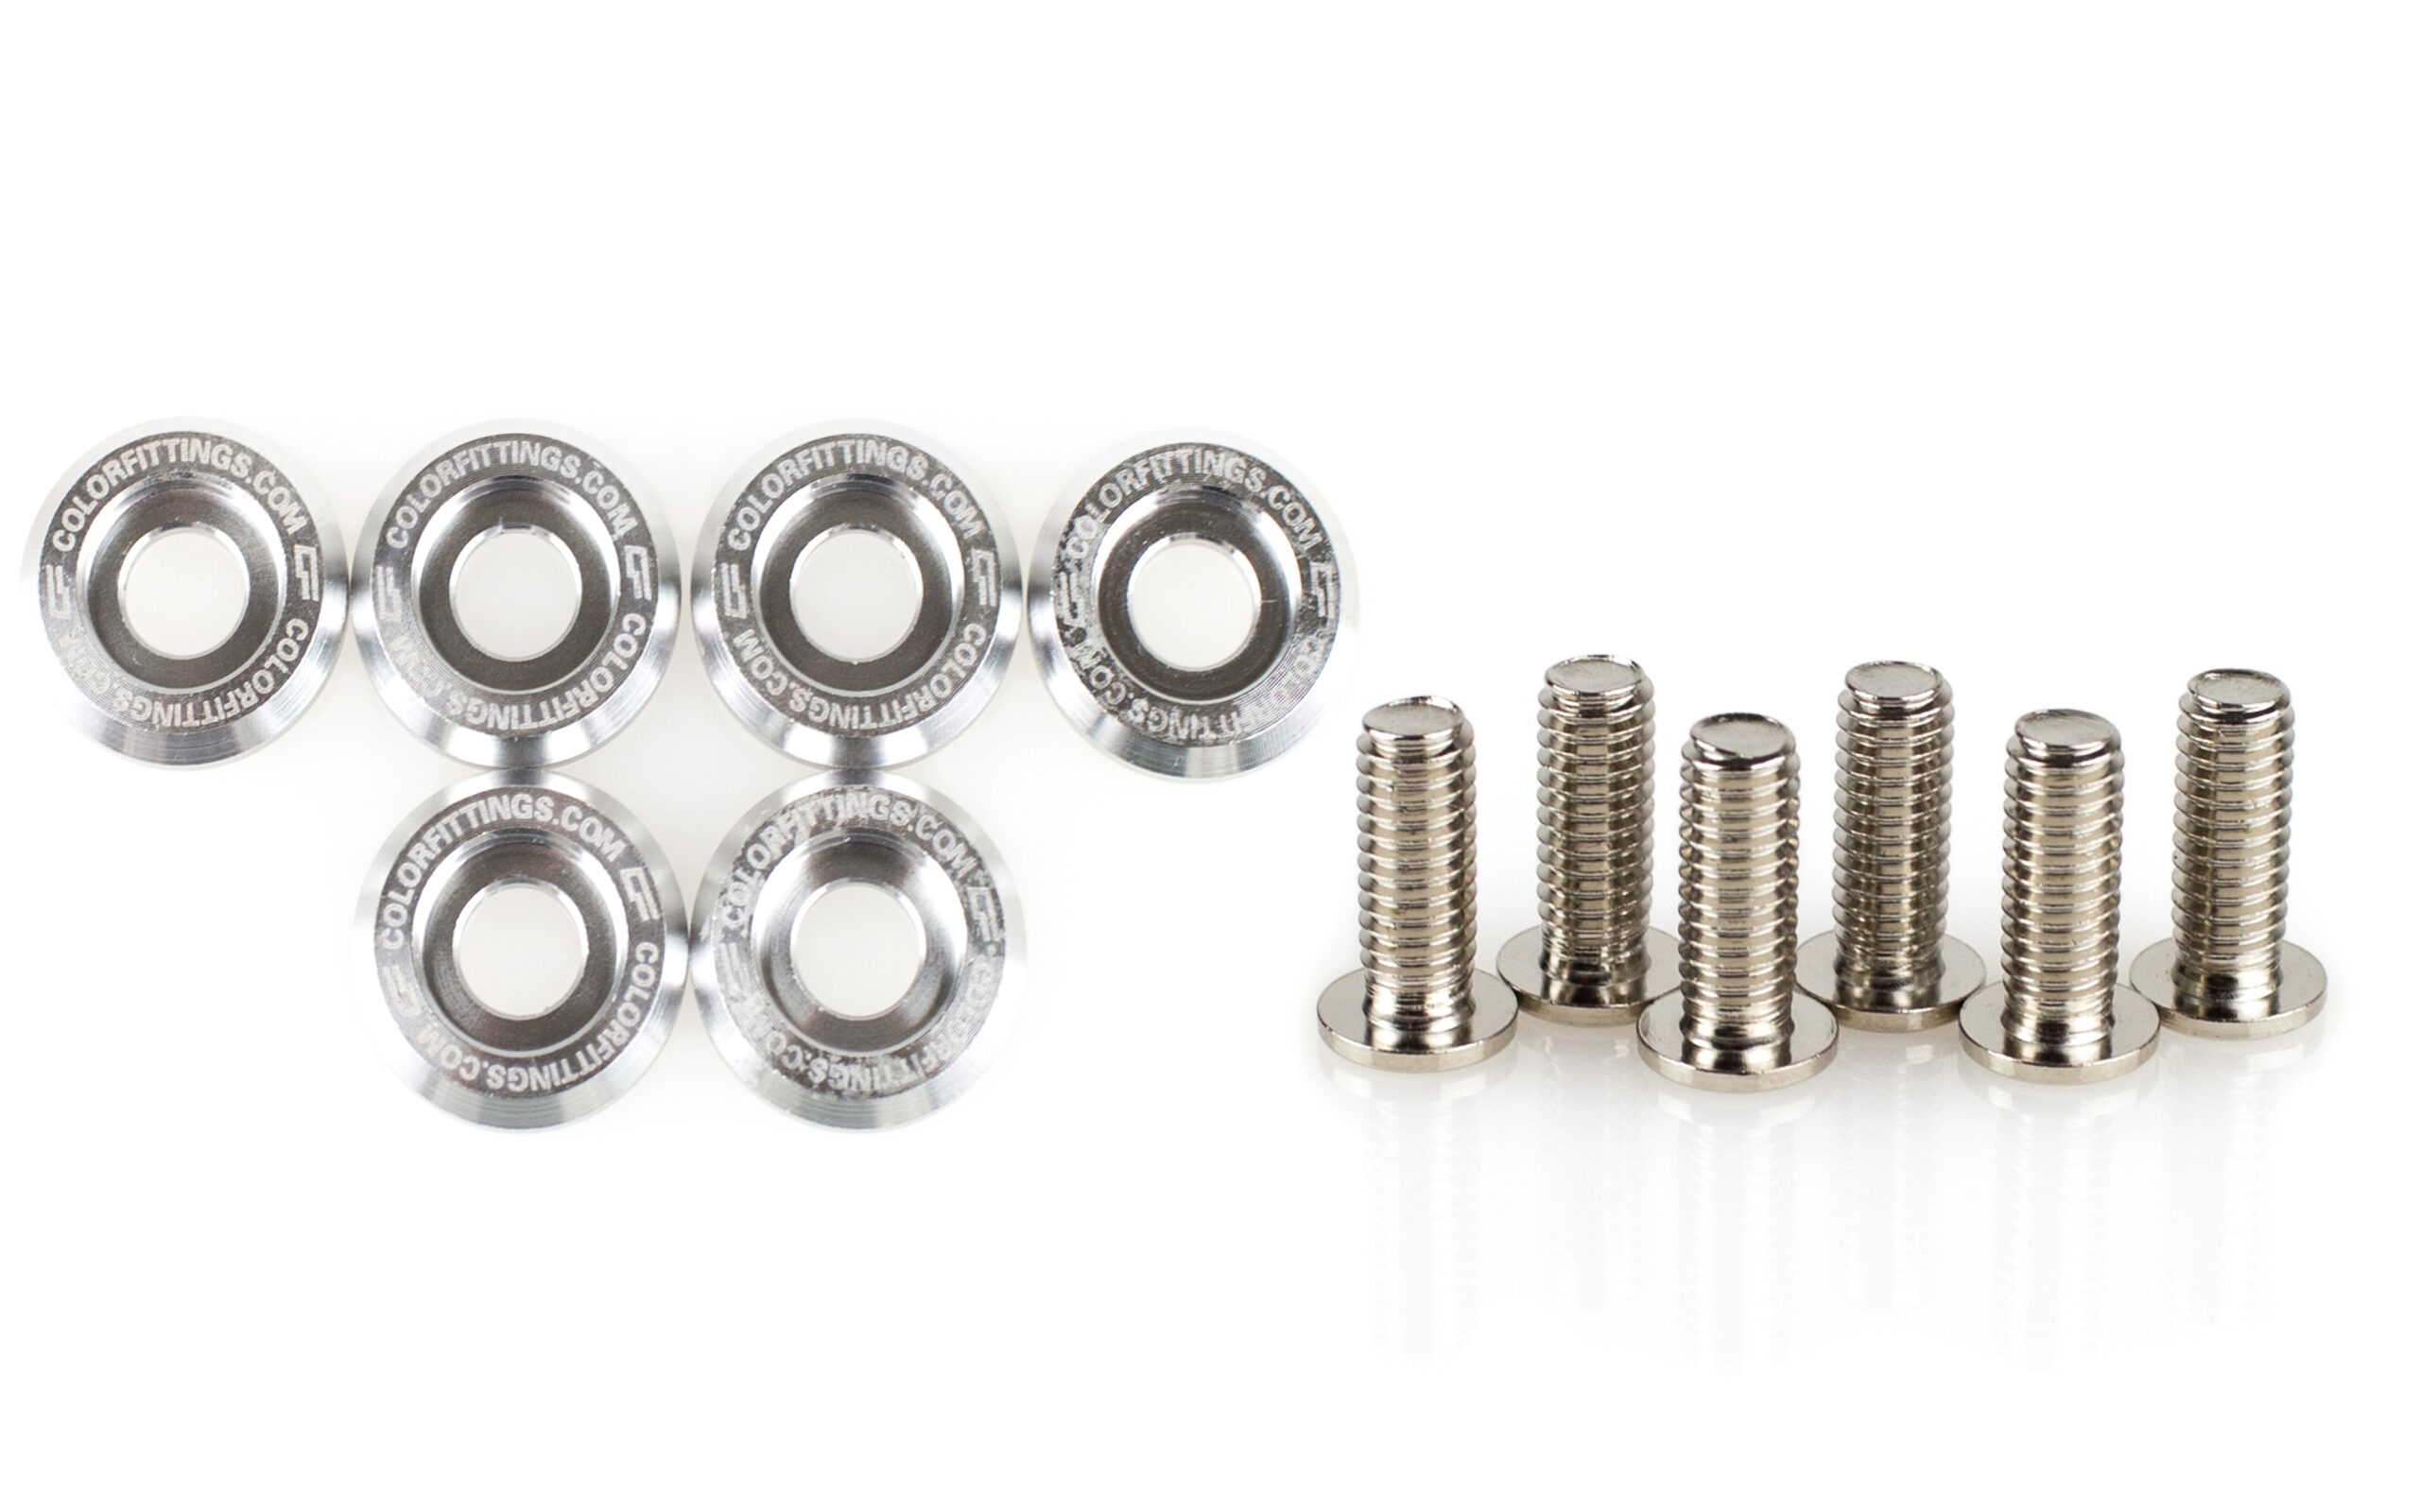 https://colorfittings.com/wp-content/uploads/2018/06/M6-lowest-low-profile-dressup-washer-bolt-kit-silver-scaled.jpg